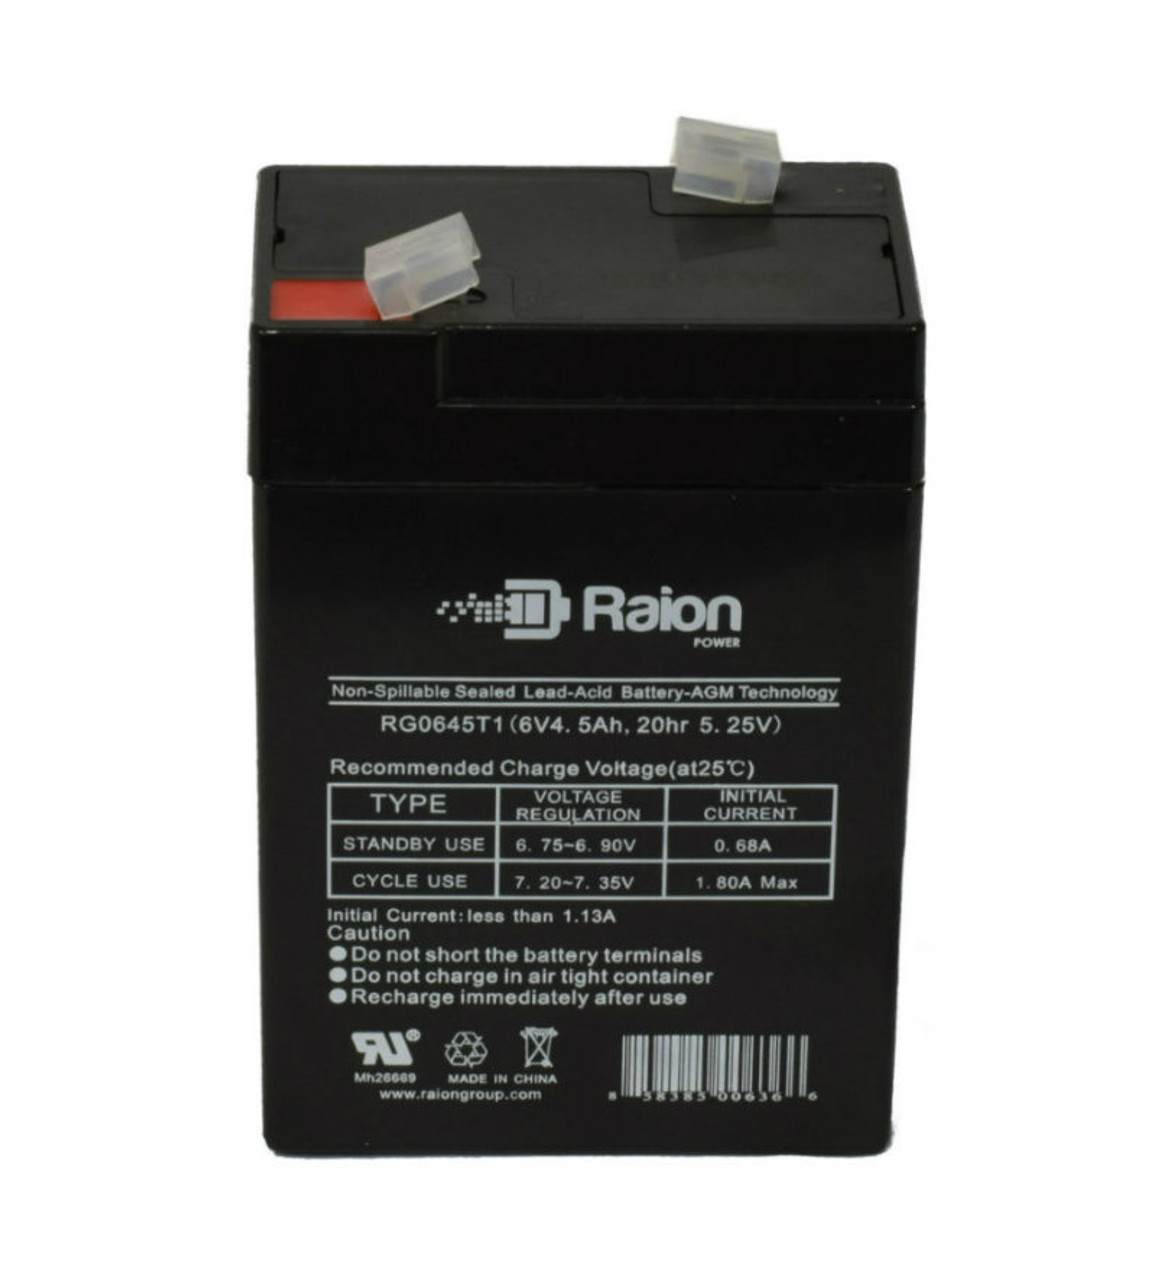 Raion Power RG0645T1 Replacement Battery Cartridge for Teledyne LASER